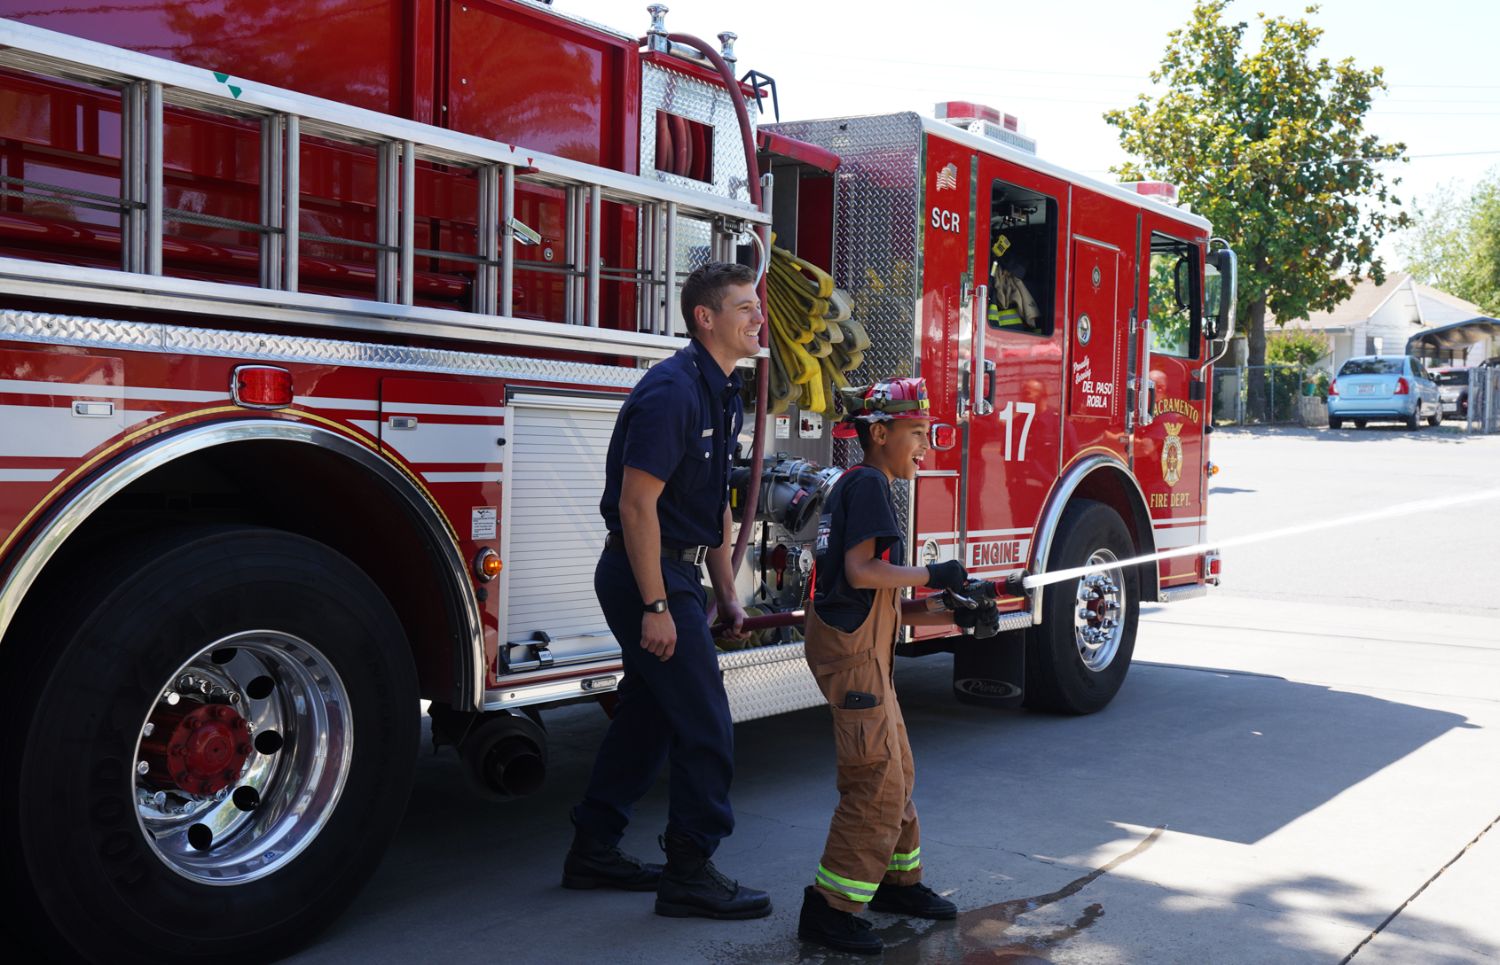 a young boy using a water hose with a firefighter assisting him, while standing in front of a fire engine.